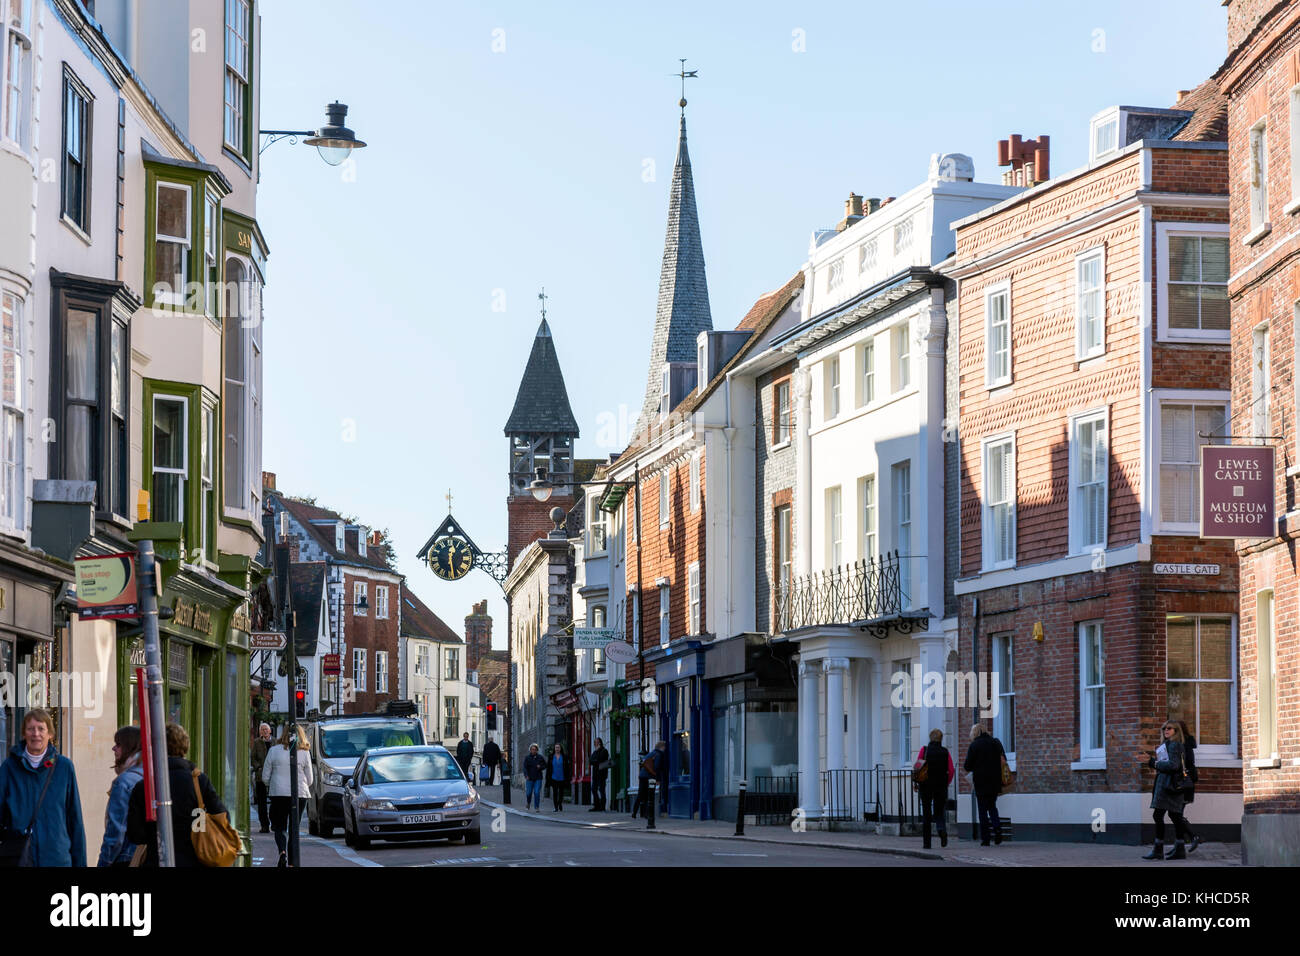 Lewes High Street, Lewes, East Sussex, England, Regno Unito Foto Stock